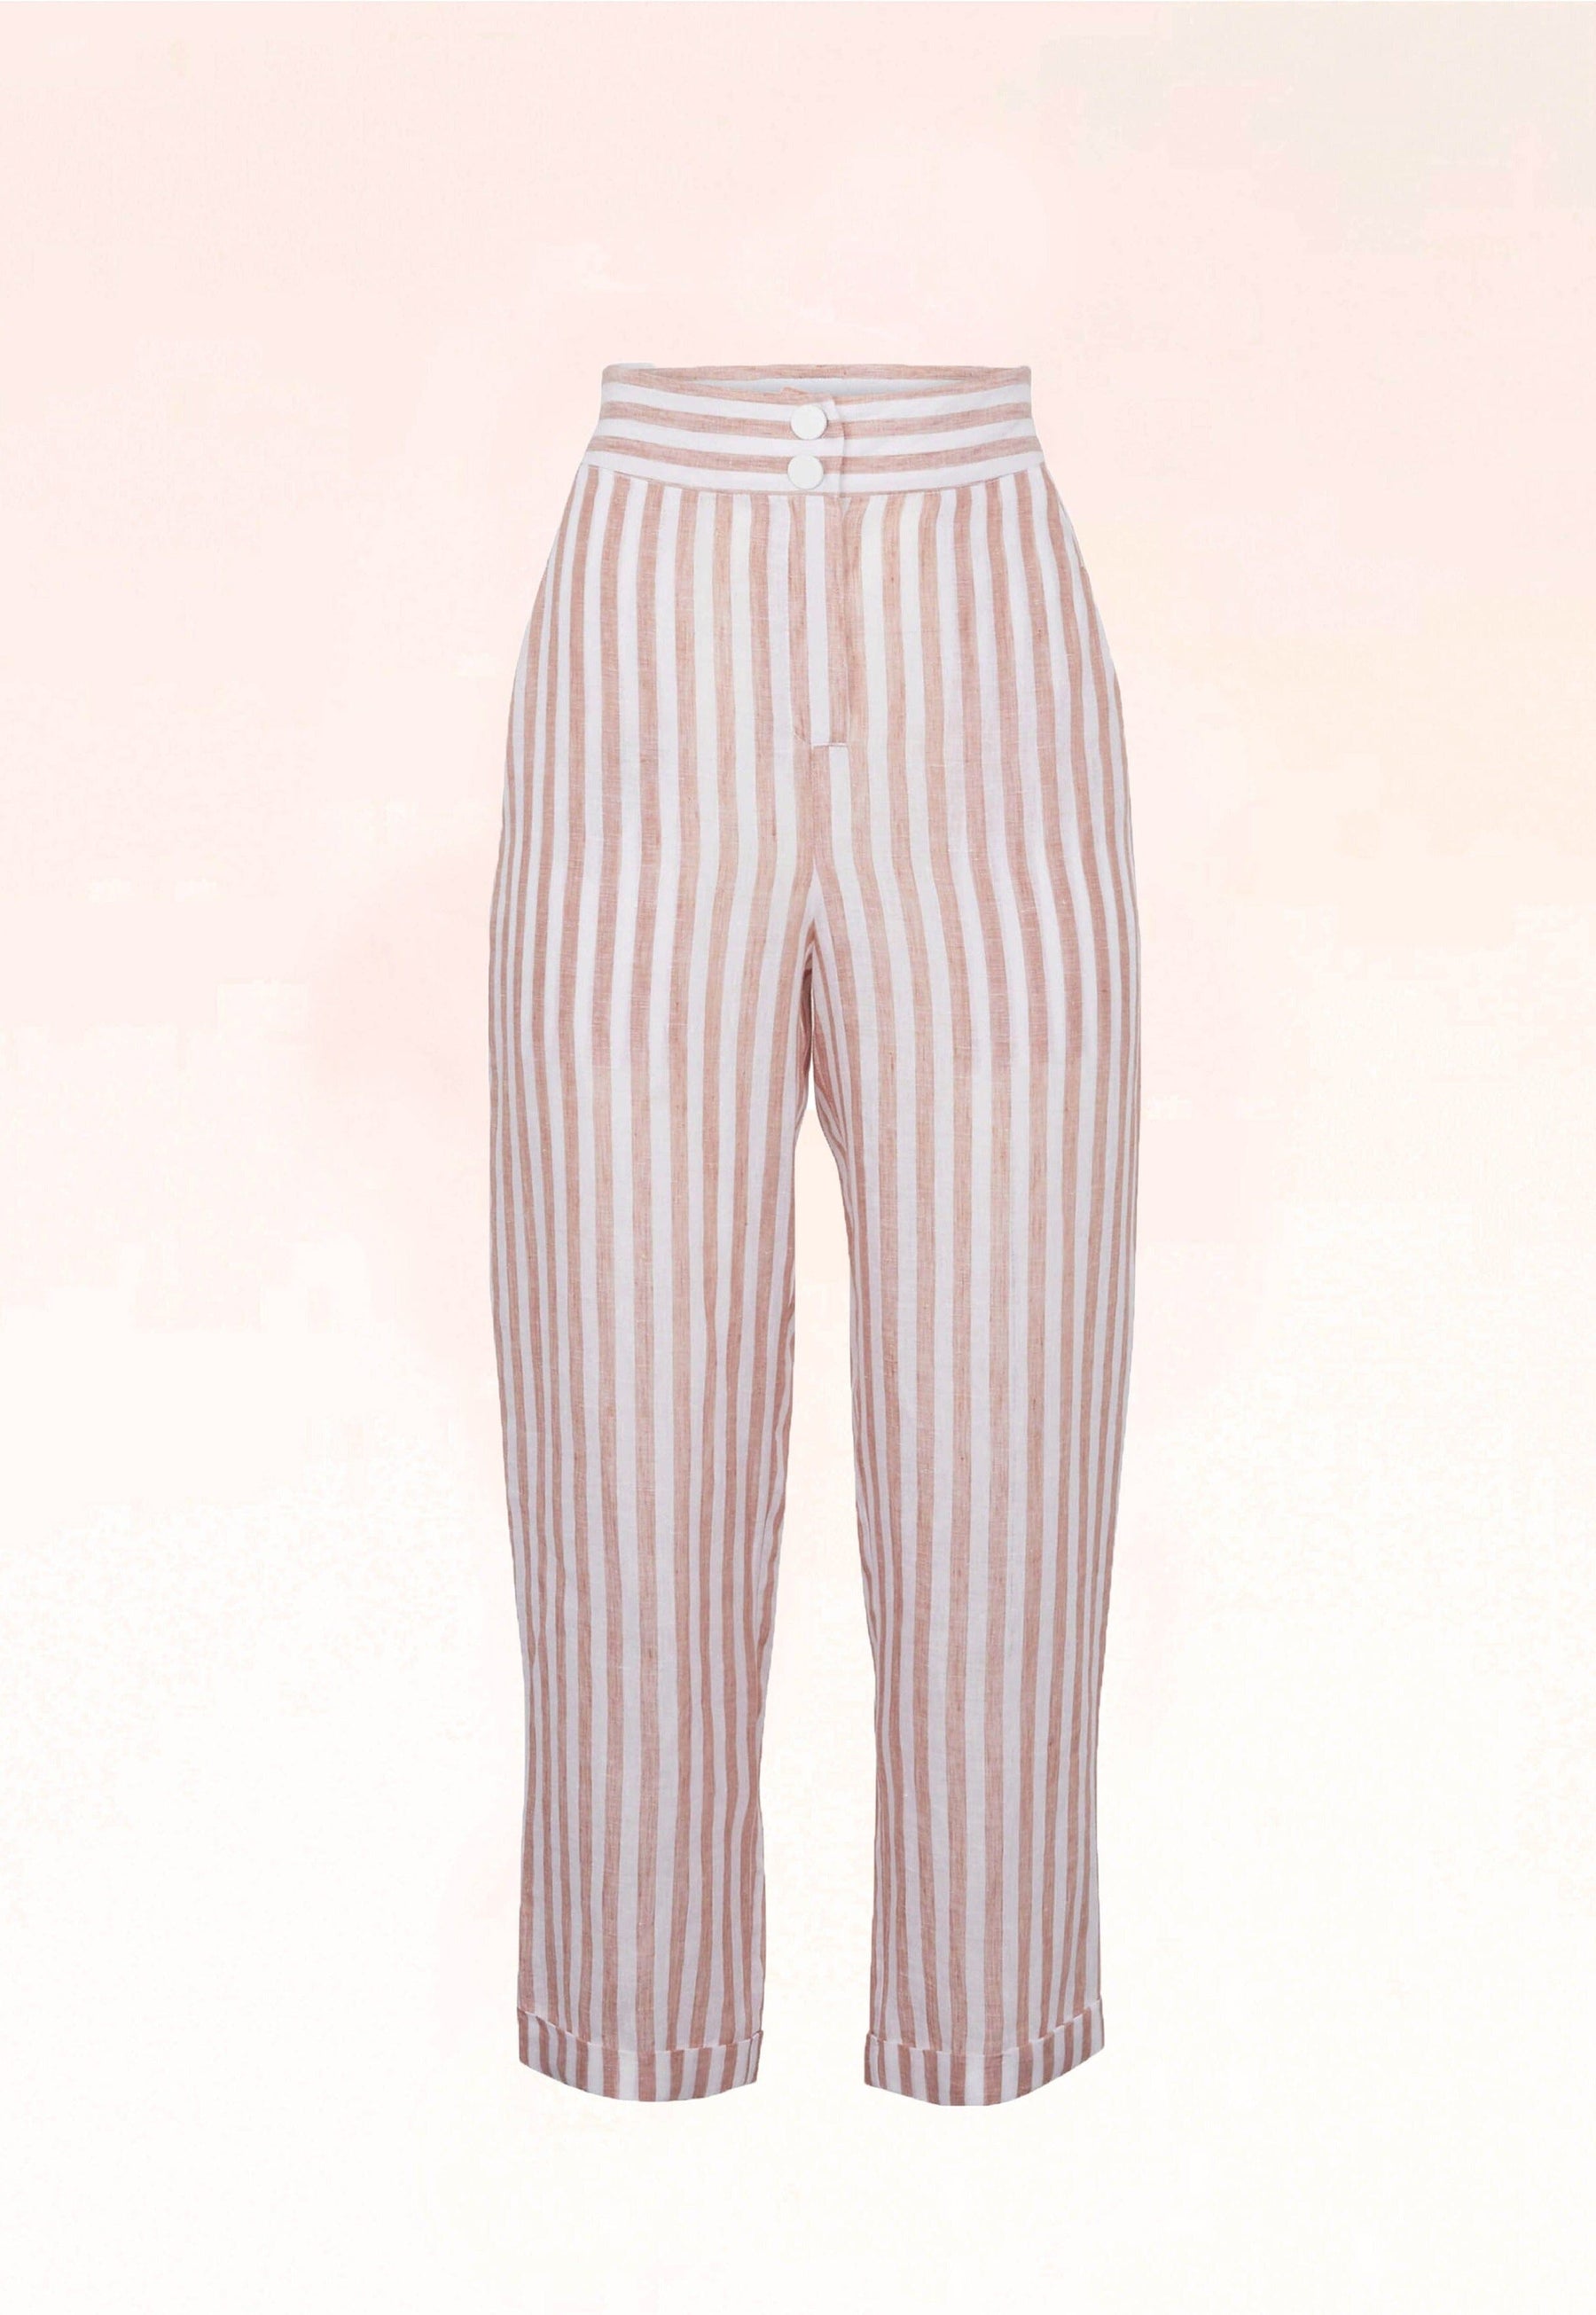 RAYMOND - High-waisted straight-leg pants in white and beige stripes Linen  Trousers Fête Impériale